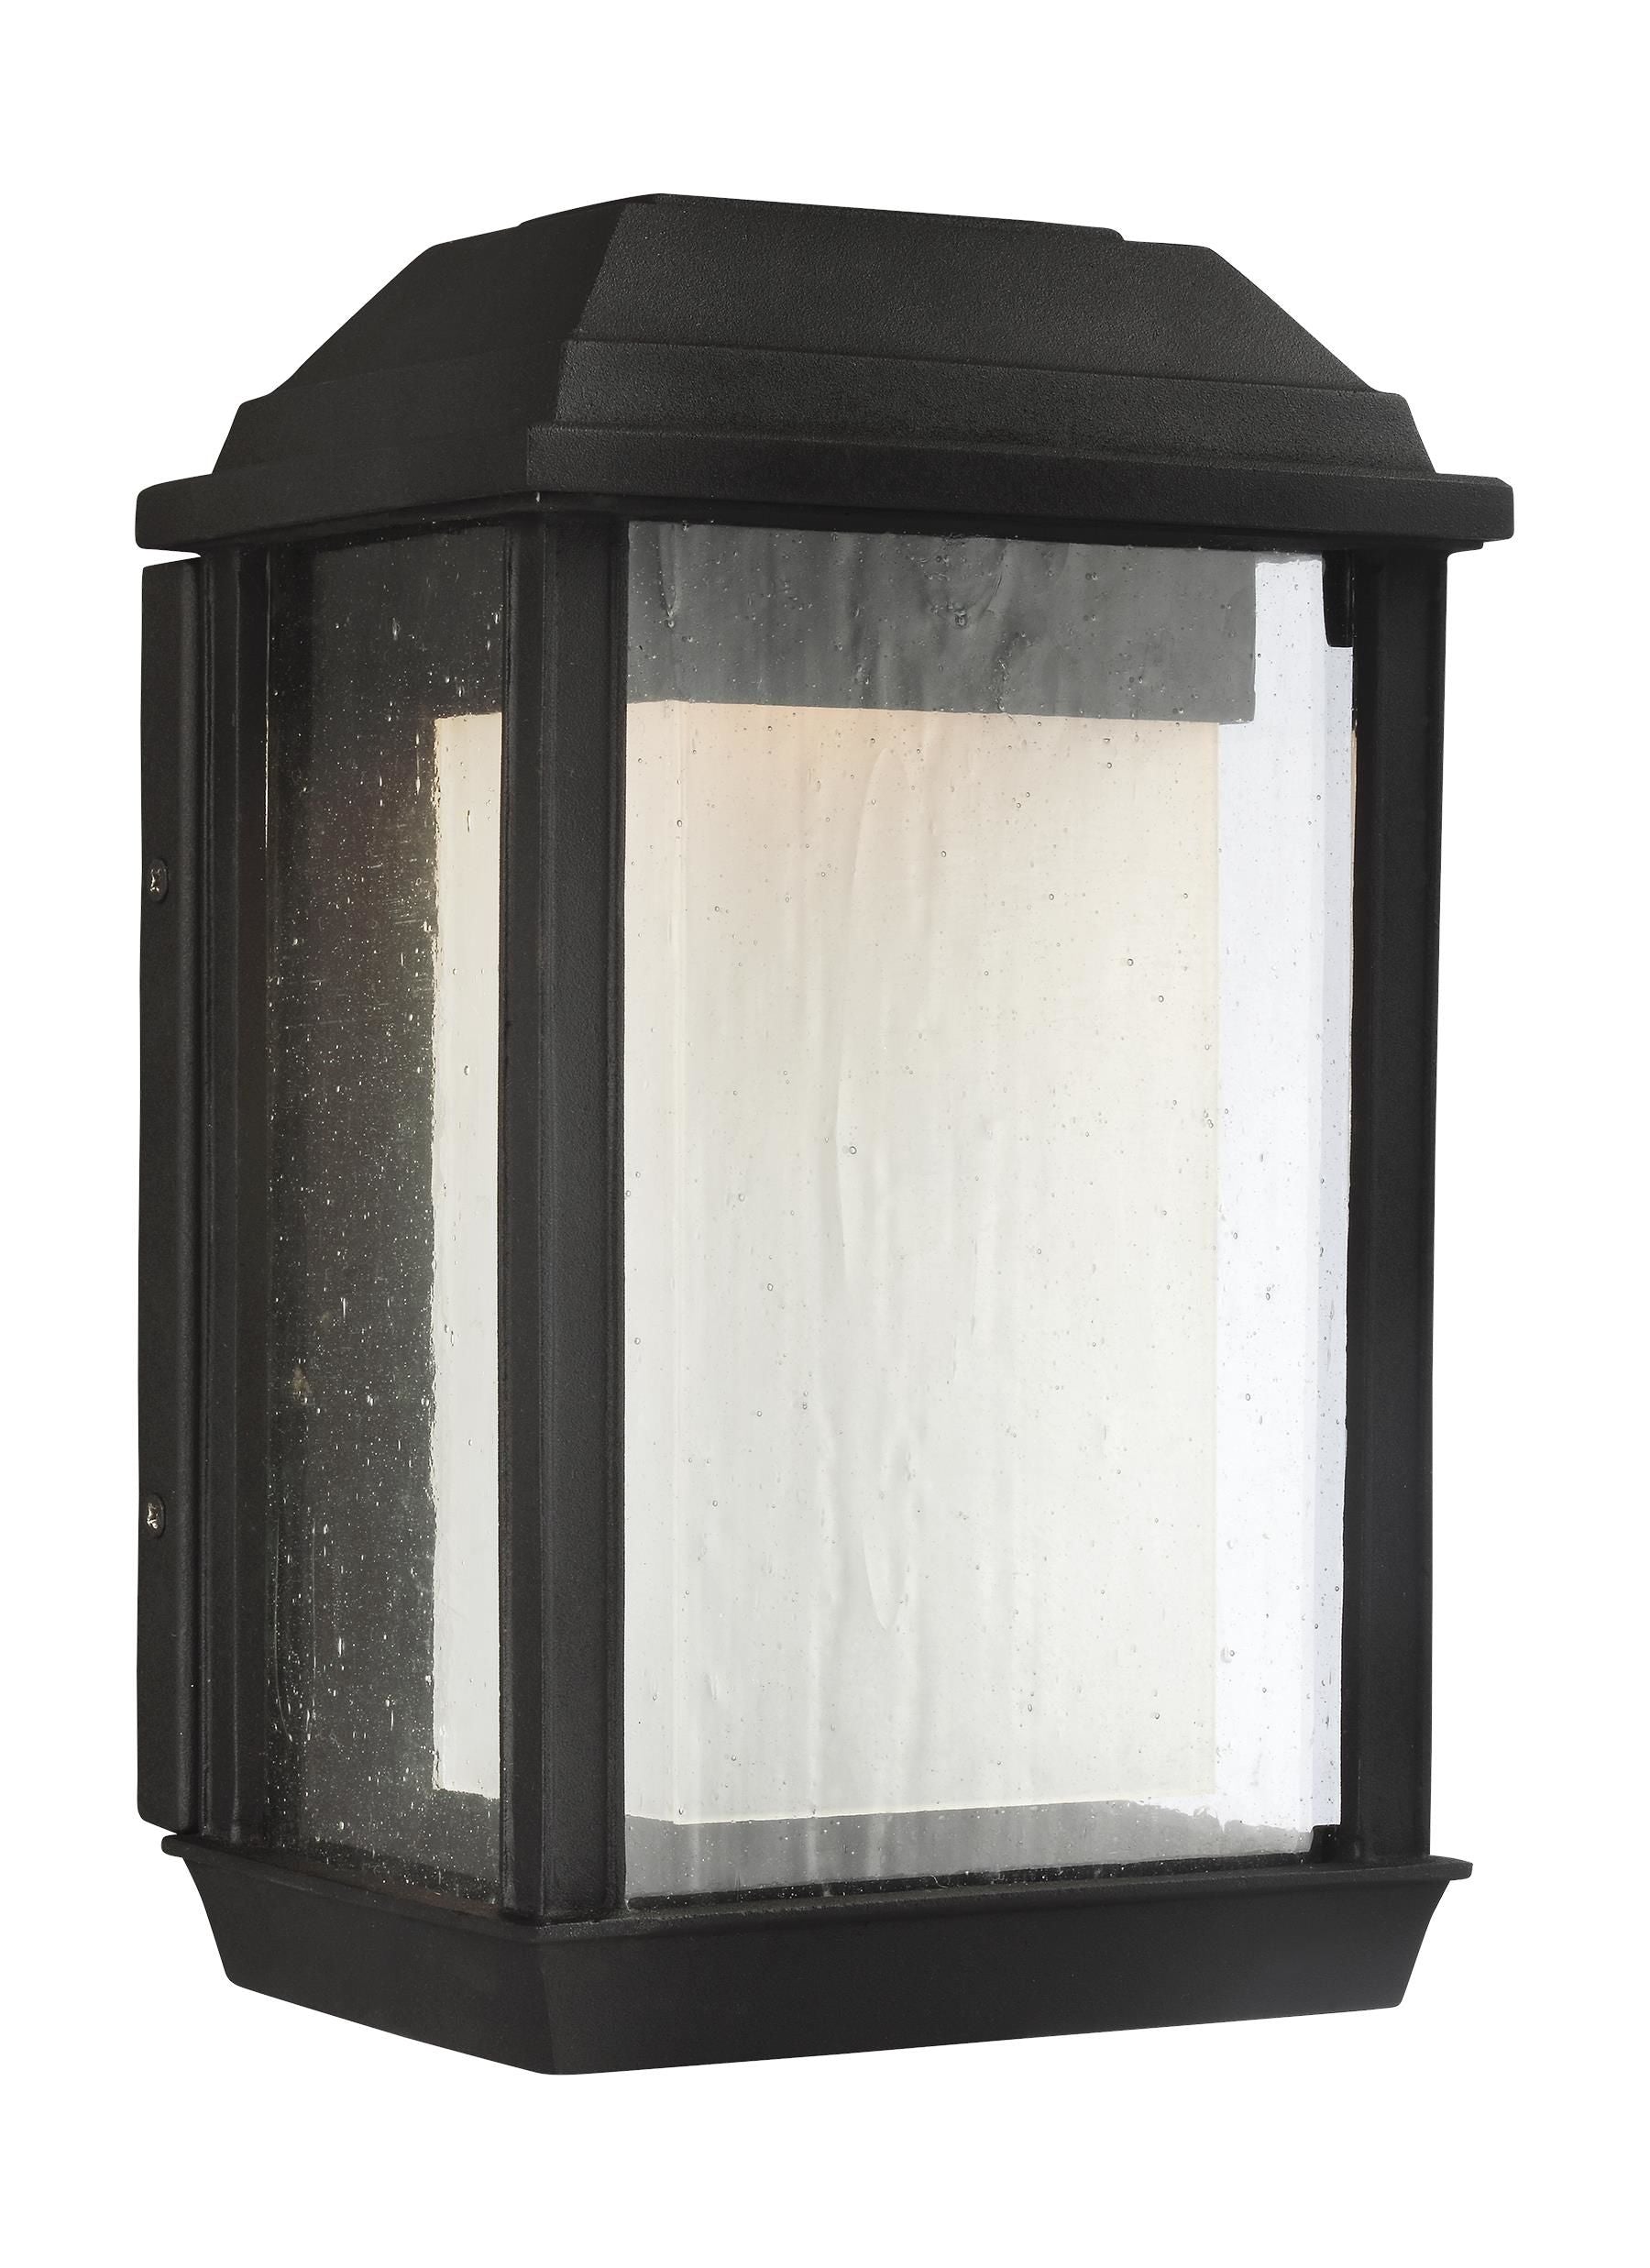 McHenry Outdoor sconce Black INTEGRATED LED - OL12800TXB-L1 | FEISS